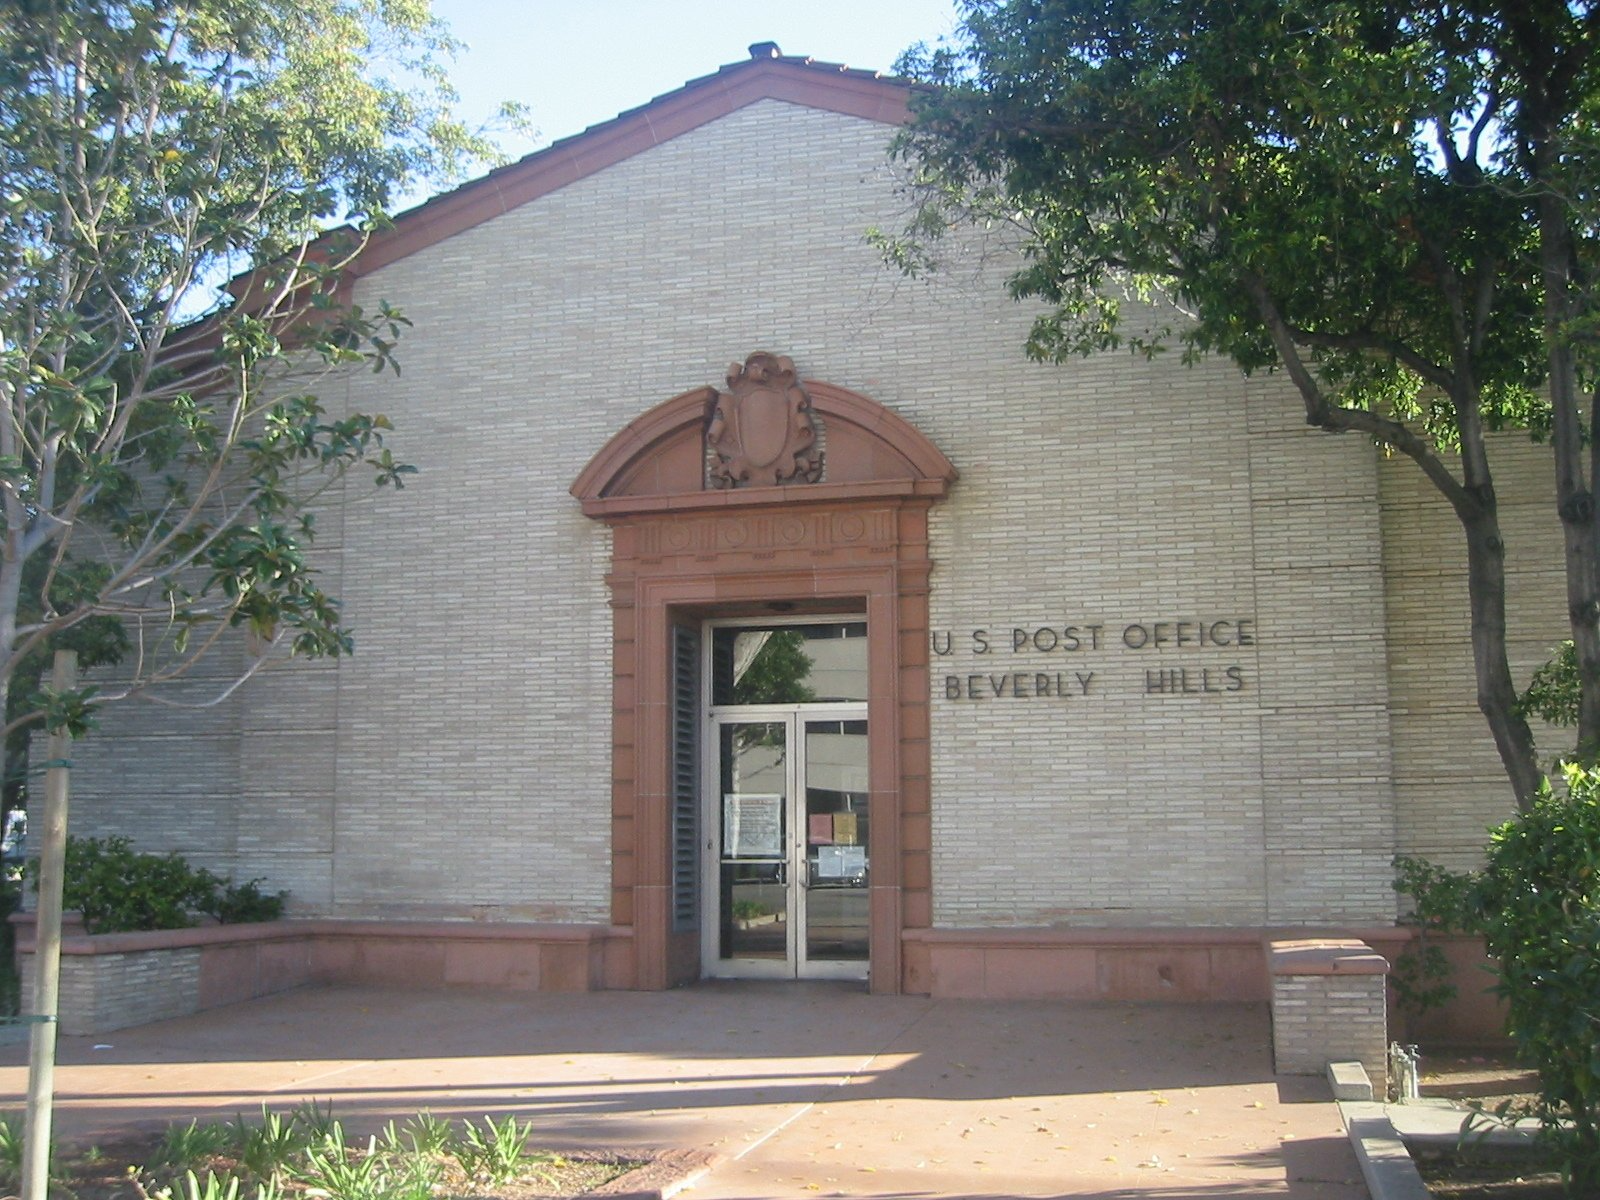 BEVERLY HILLS POST OFFICE